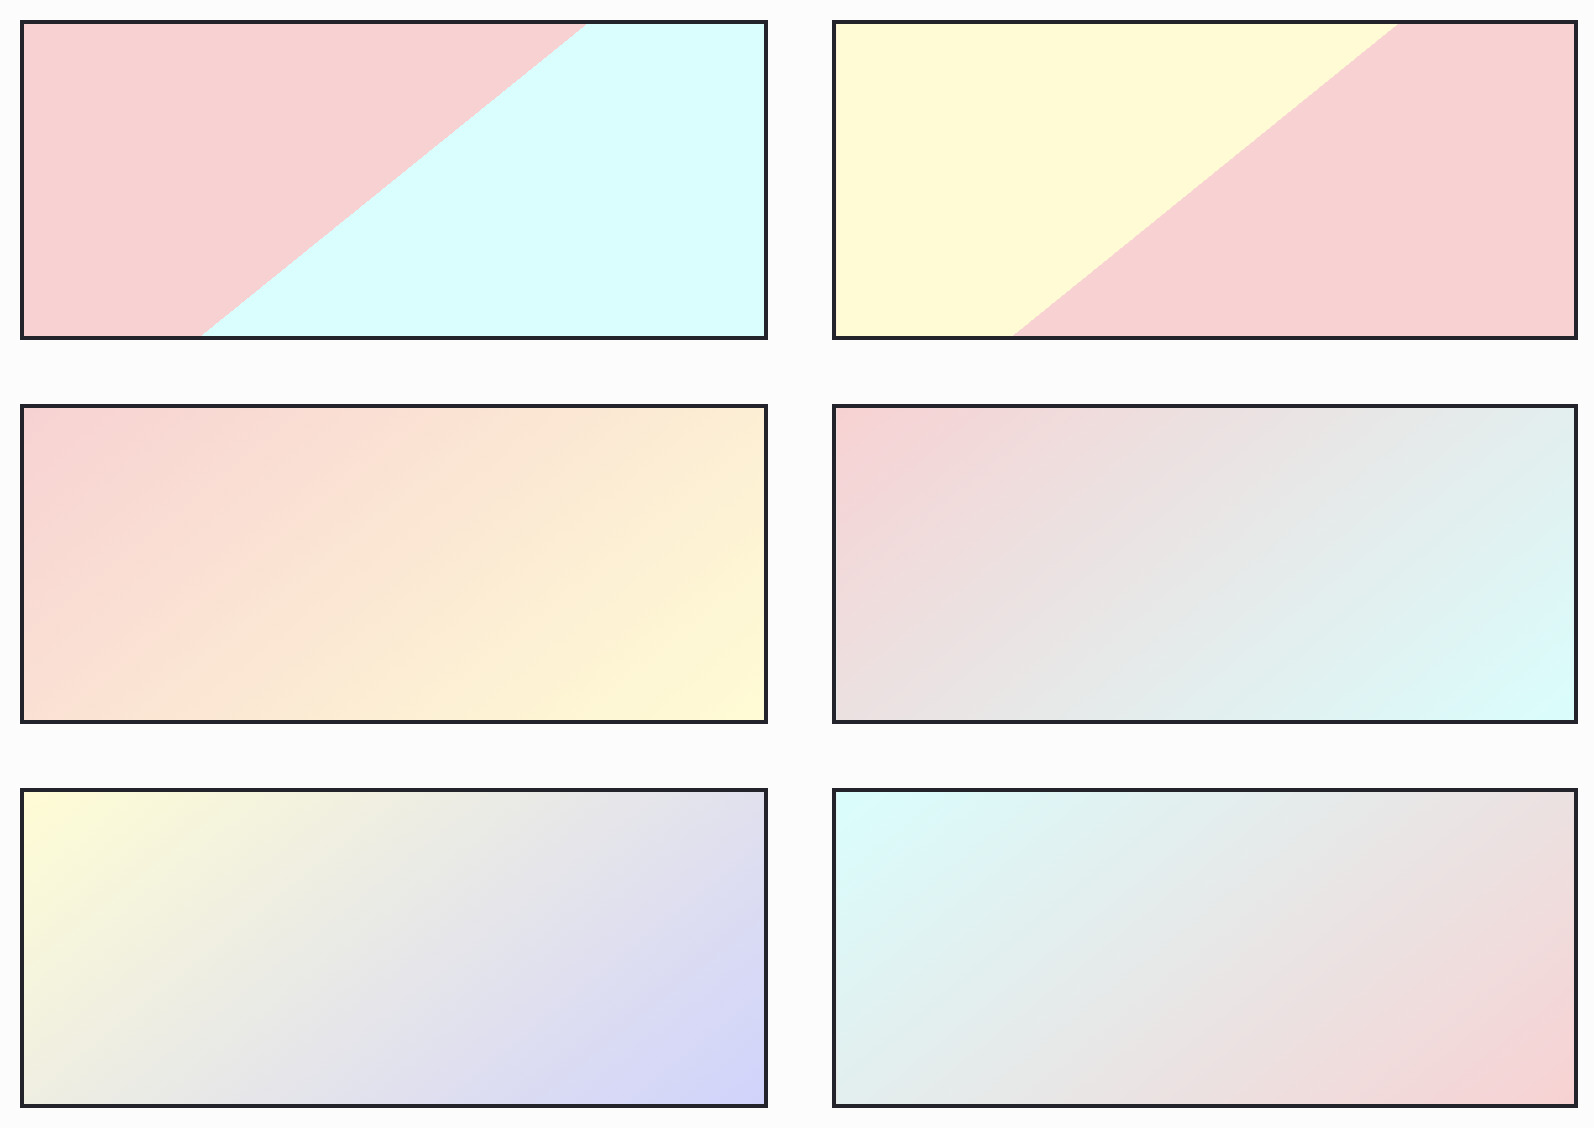 A collection of black-bordered rectangles, each with a different combination of two pastel colours blurred together from top-left to bottom-right.